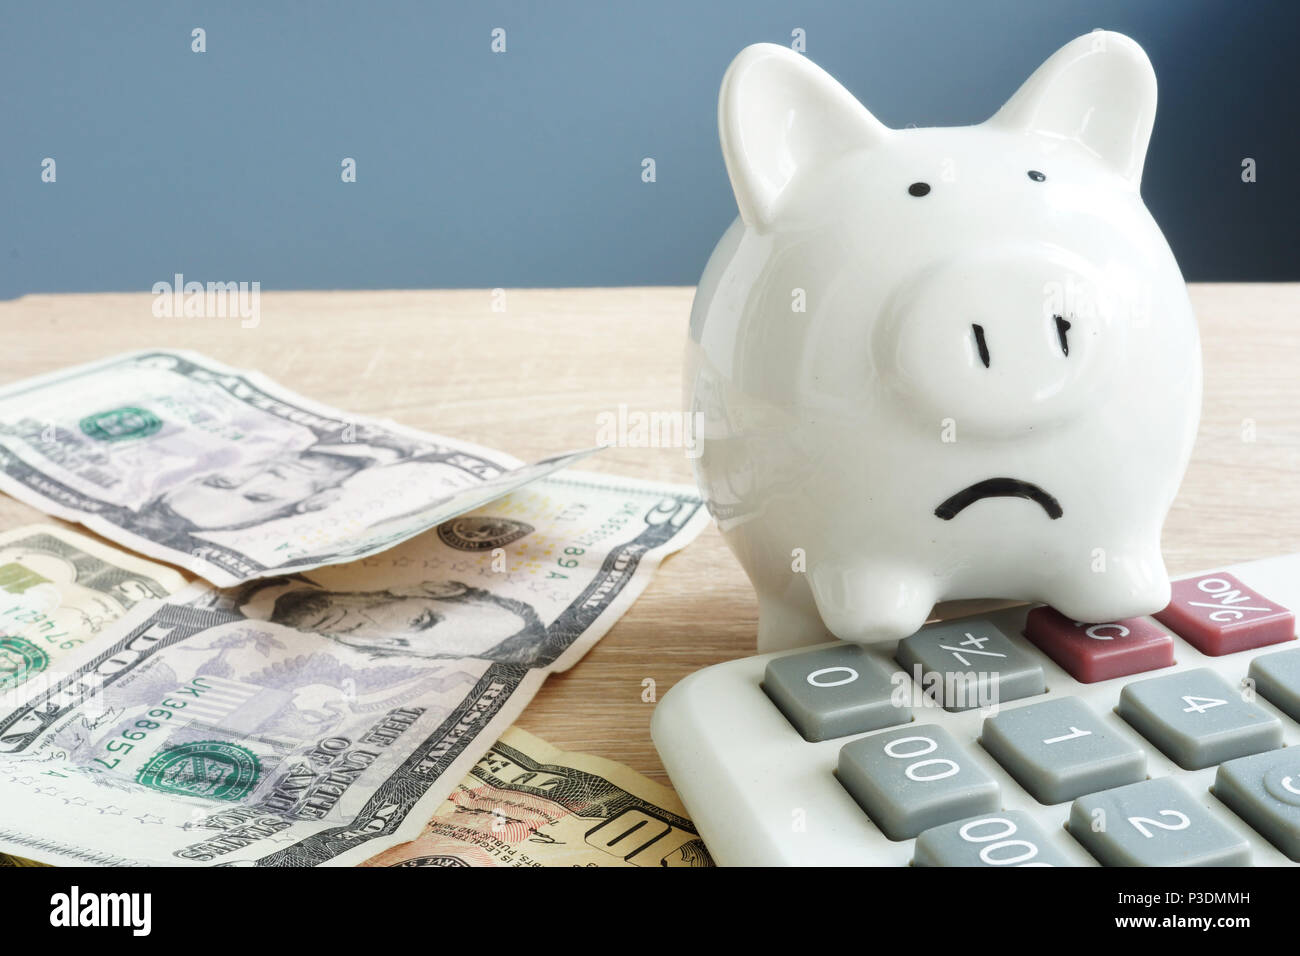 Money worries concept. Unhappy piggy and few banknotes with calculator. Problems with money. Stock Photo